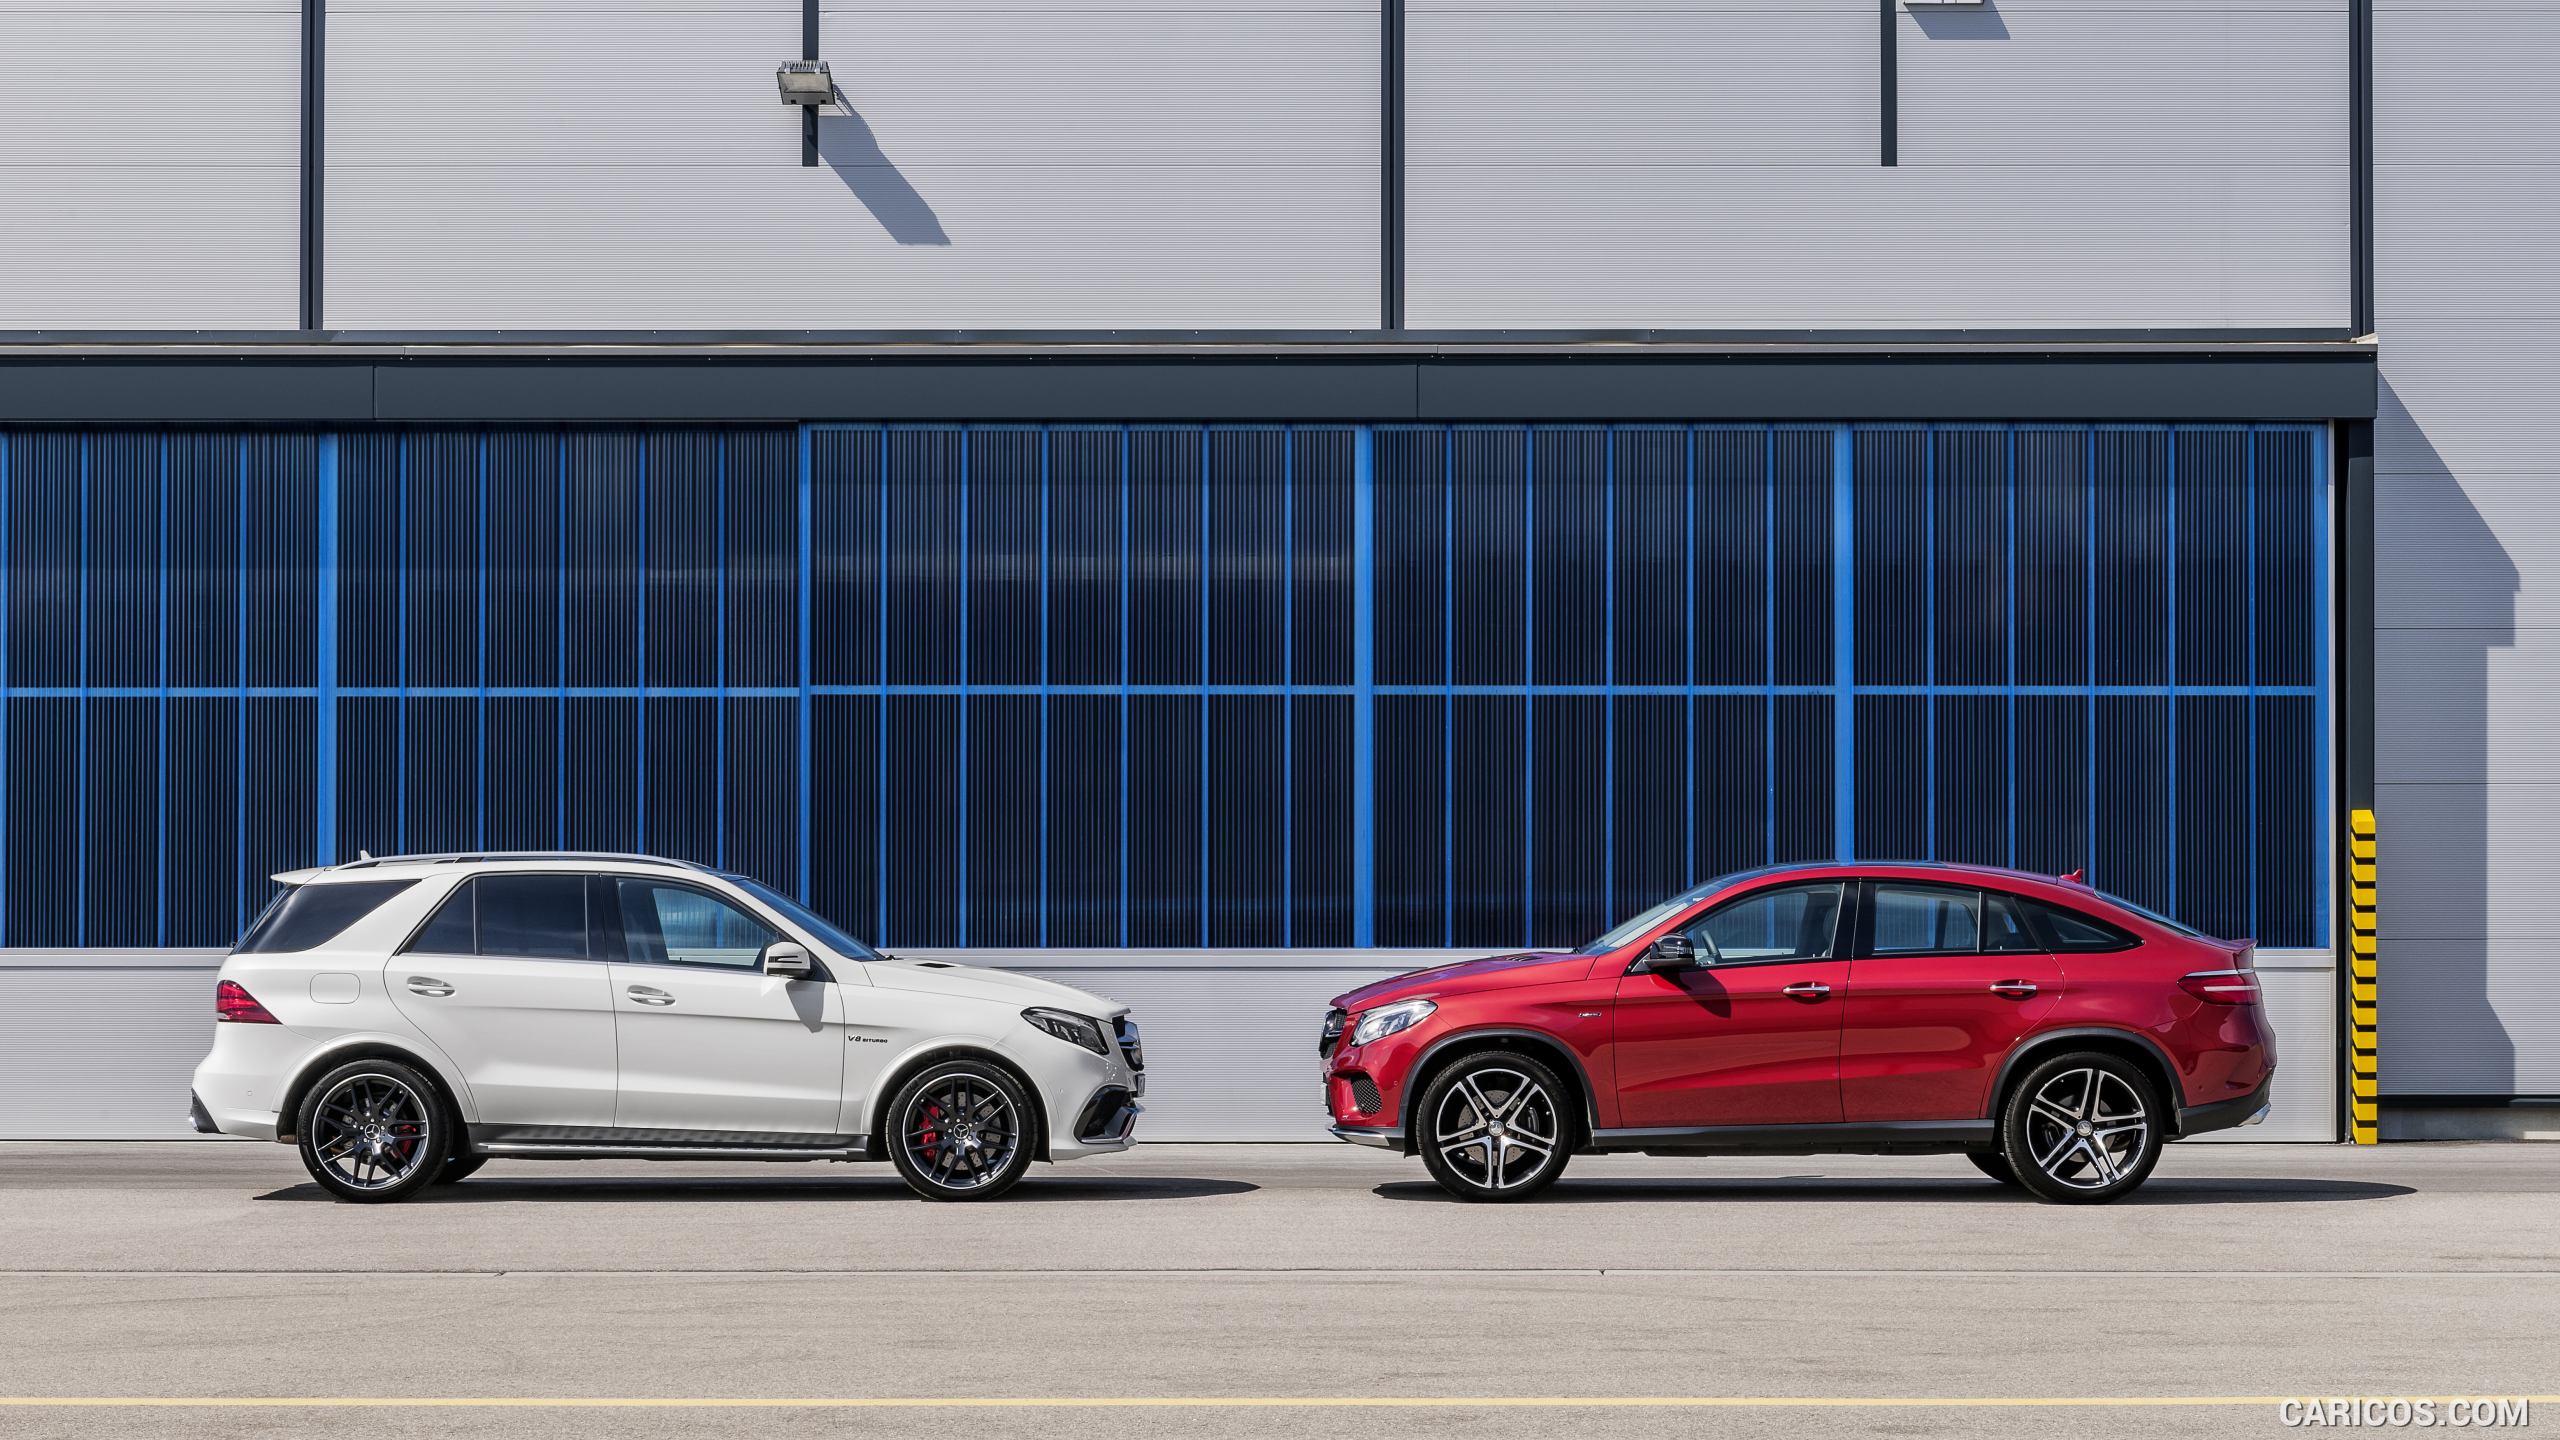 2016 Mercedes-Benz GLE 450 AMG Coupe 4MATIC (Designo Hyacinth Red Metallic) and Mercedes-AMG GLE 63 S - Side, #30 of 115